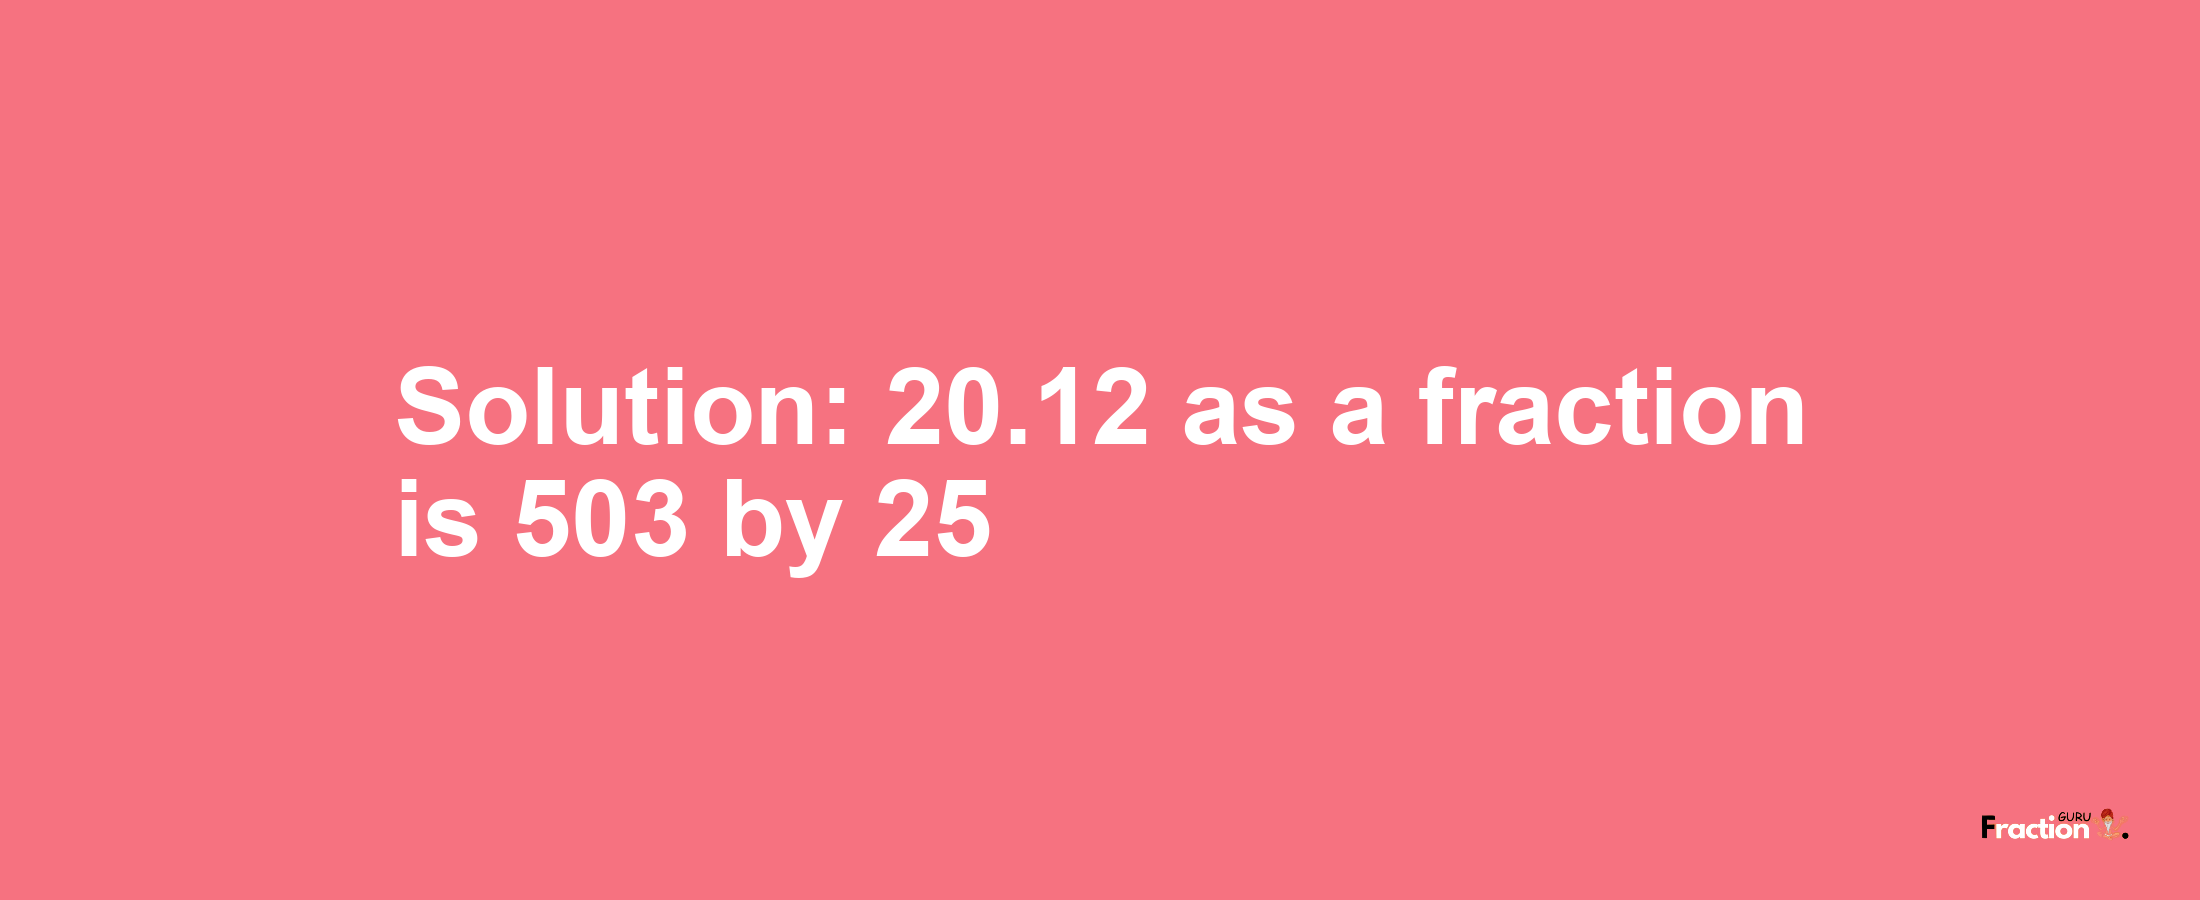 Solution:20.12 as a fraction is 503/25